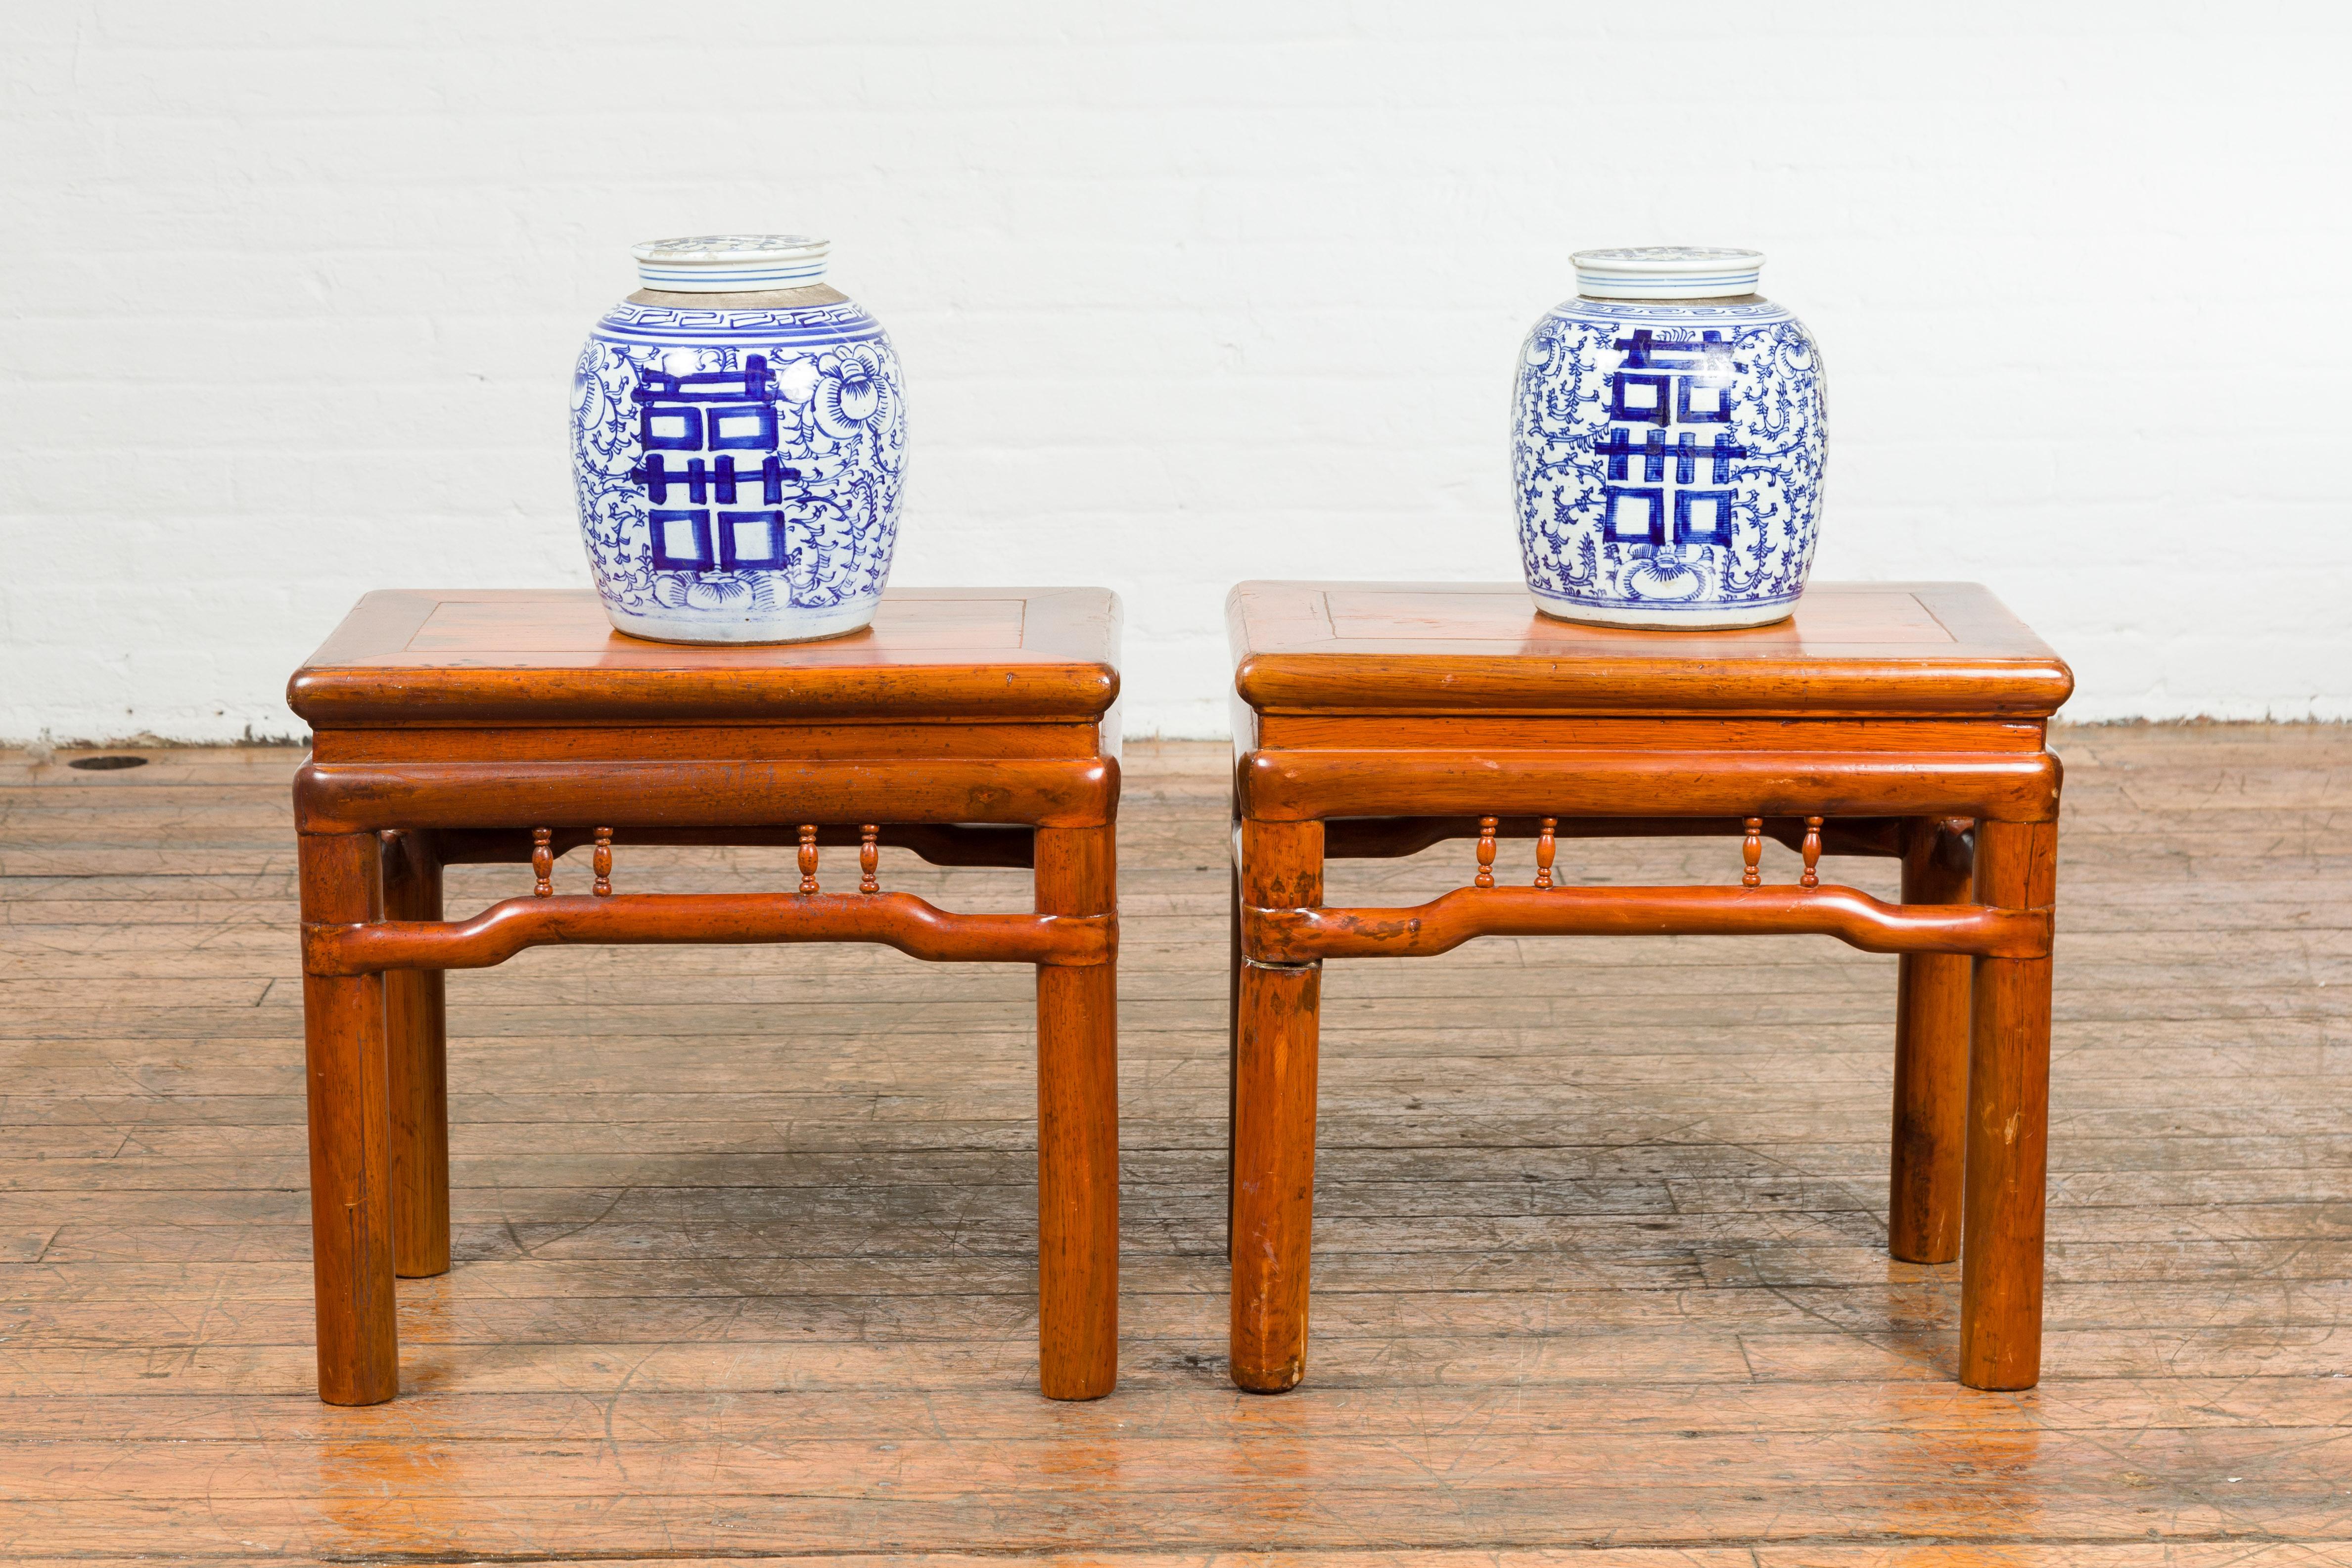 Pair of Chinese Qing Dynasty 19th Century Side Tables with Humpback Stretchers In Good Condition For Sale In Yonkers, NY